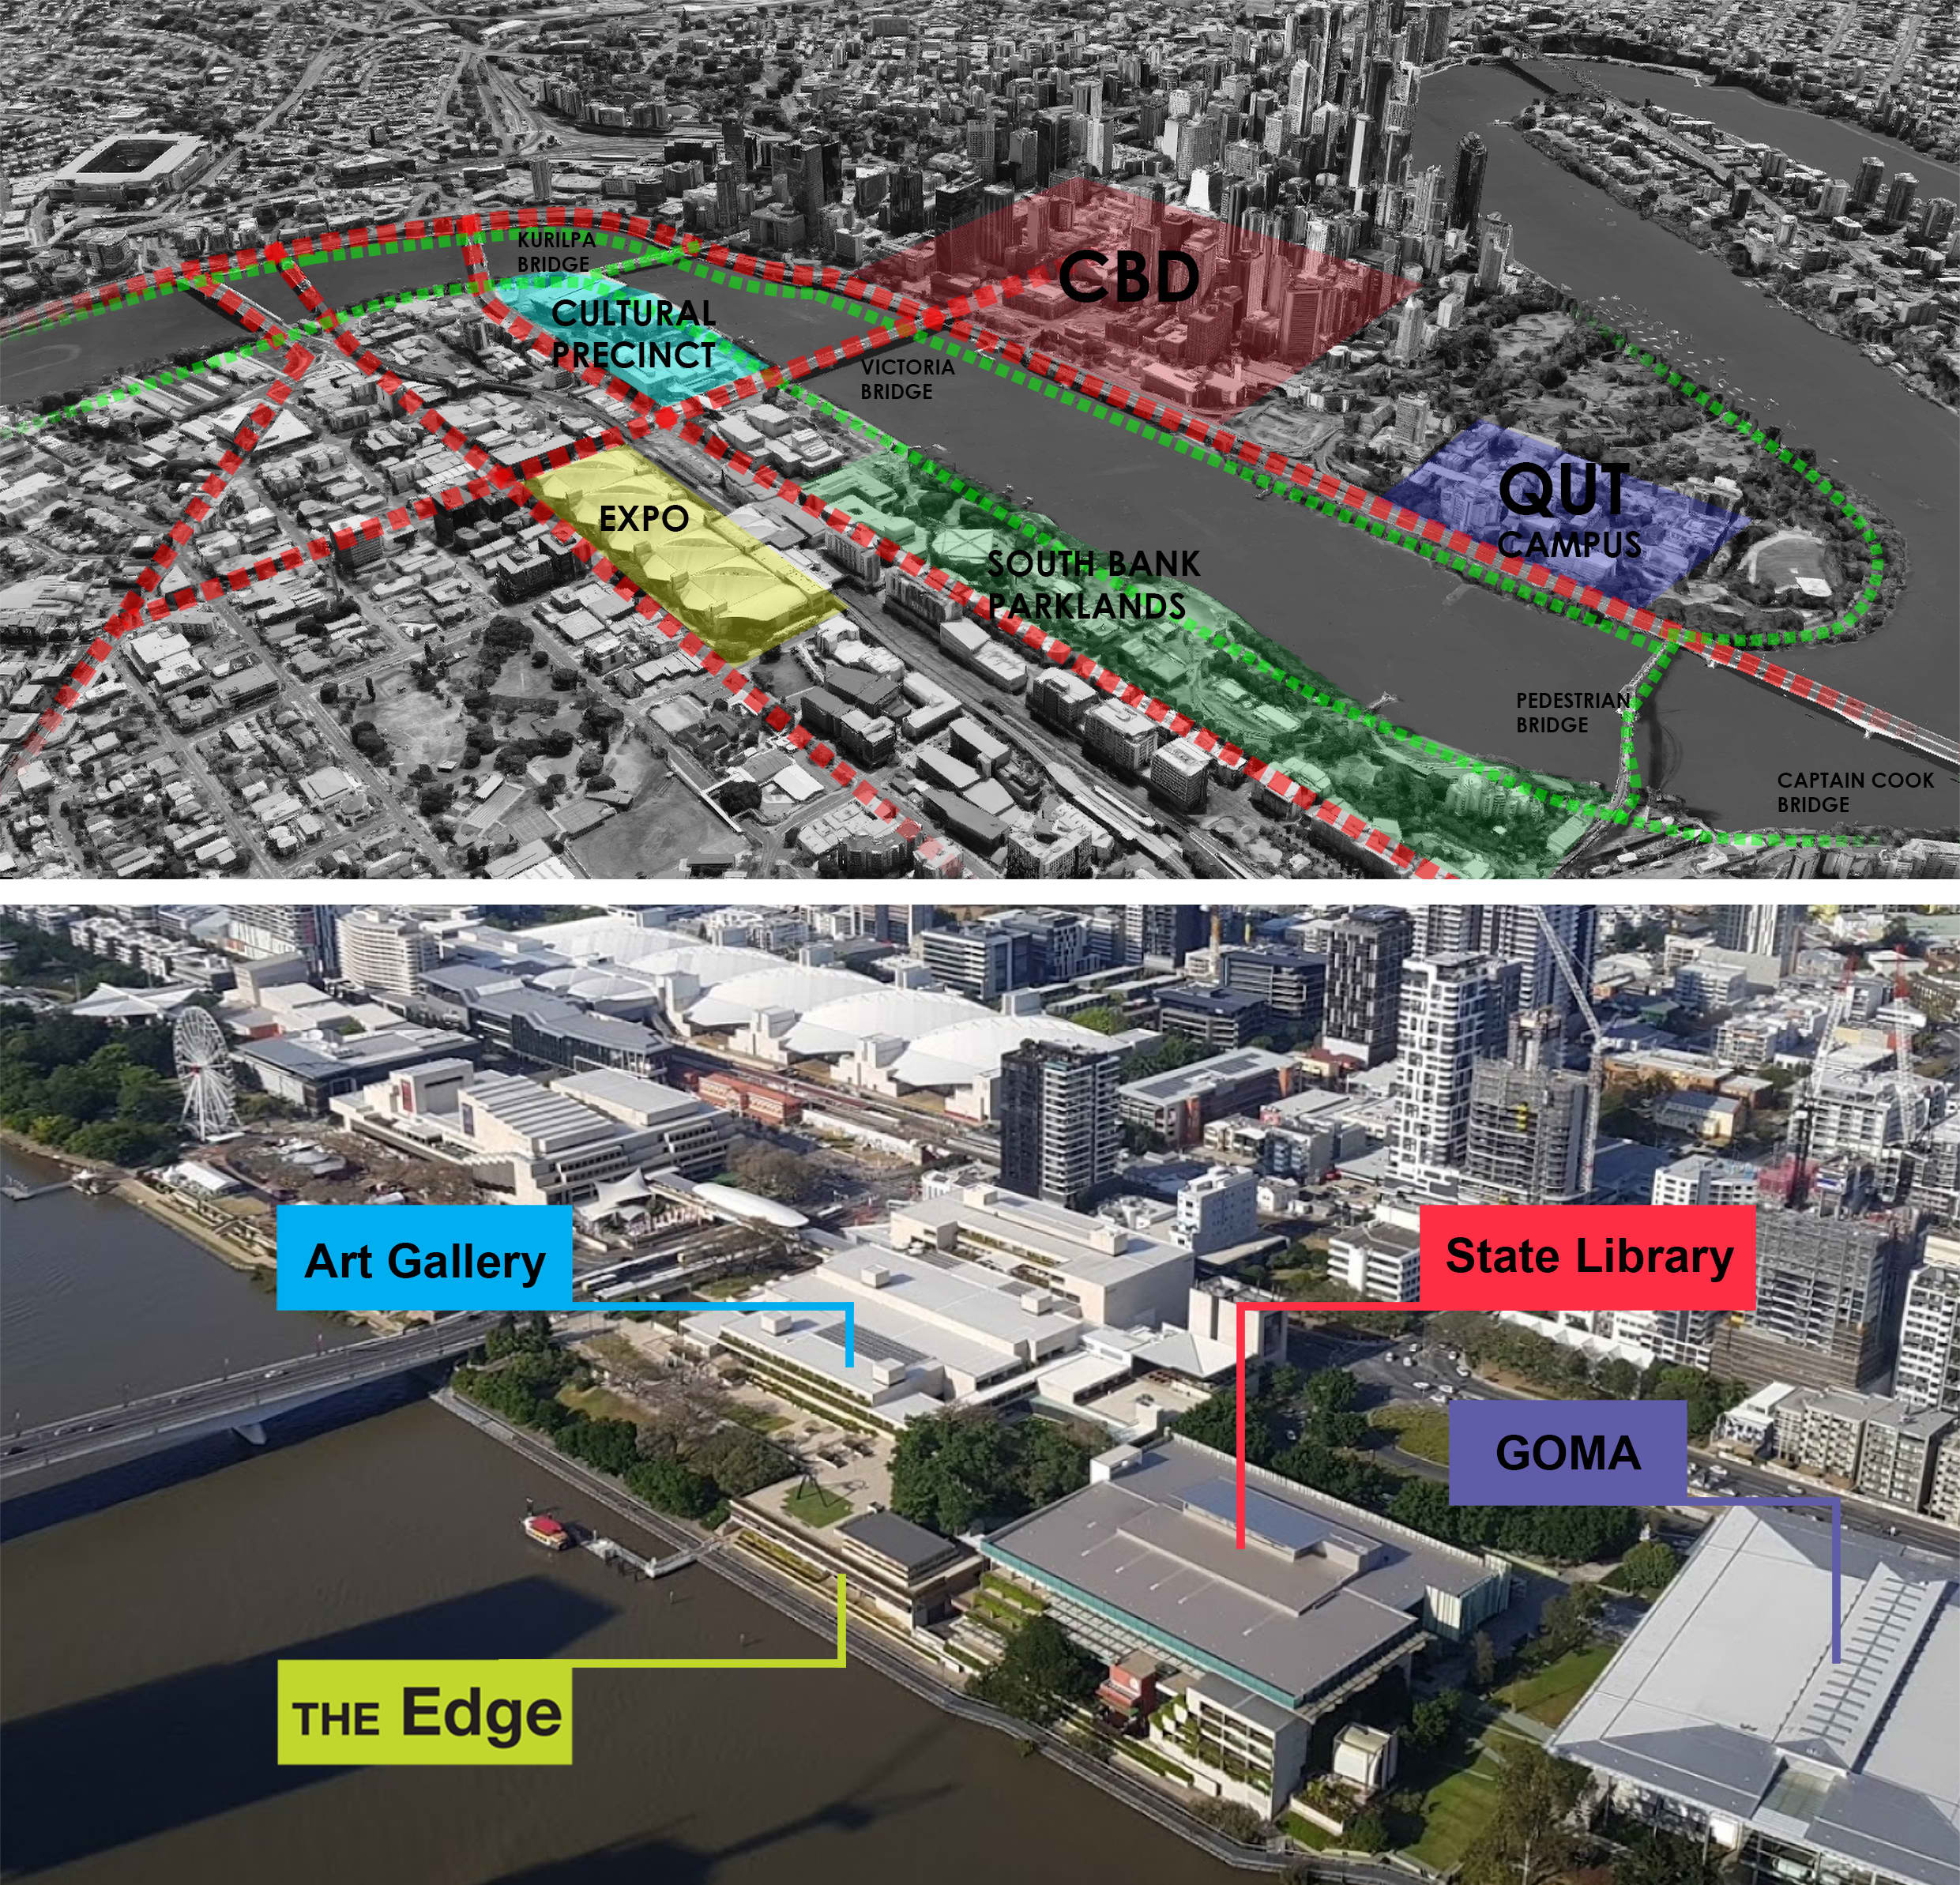 Images of the urban context where the Edge is located.